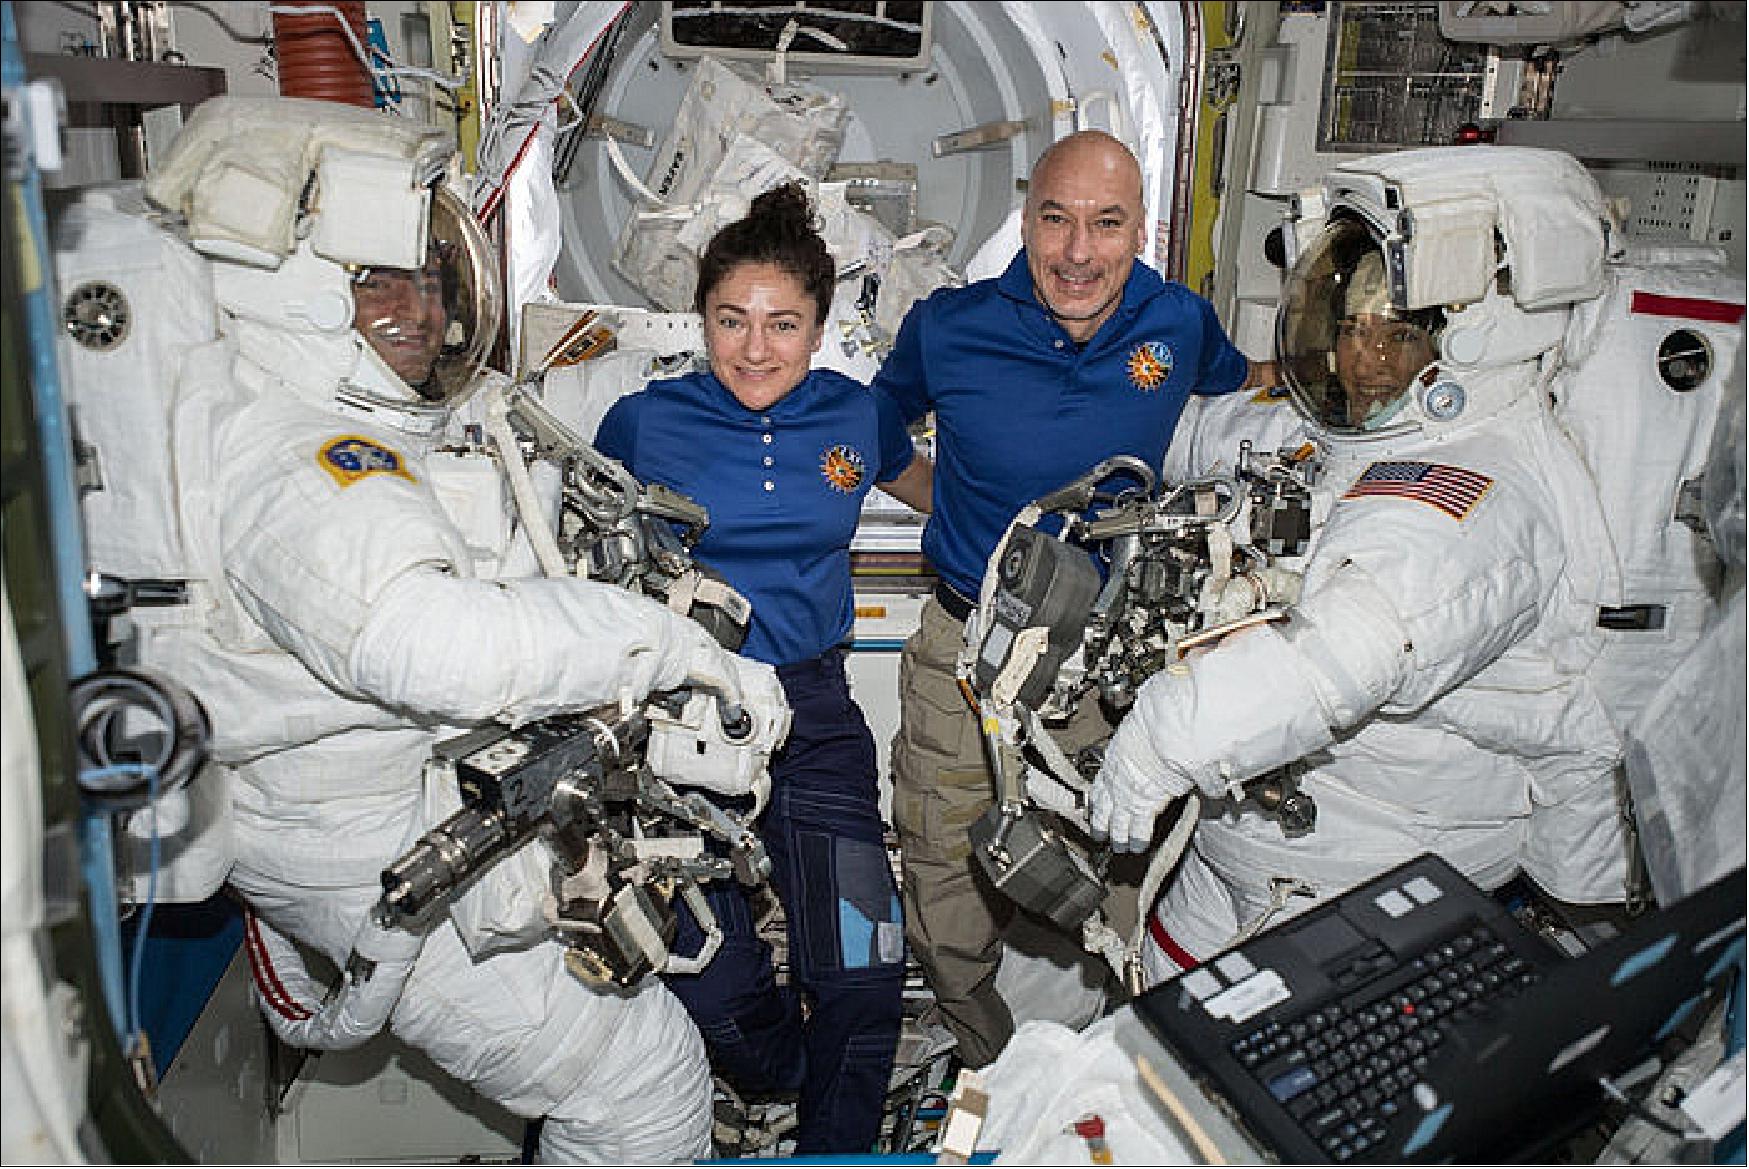 Figure 35: Astronauts assist spacewalkers in the Quest airlock. NASA astronauts Andrew Morgan (left) and Christina Koch (right) are suited up in U.S. spacesuits before beginning a seven hour and one minute spacewalk to upgrade the station's large nickel-hydrogen batteries with newer, more powerful lithium-ion batteries. In the center, NASA Flight Engineer Jessica Meir and Commander Luca Parmitano of ESA assist the spacewalking duo (image credit: NASA)